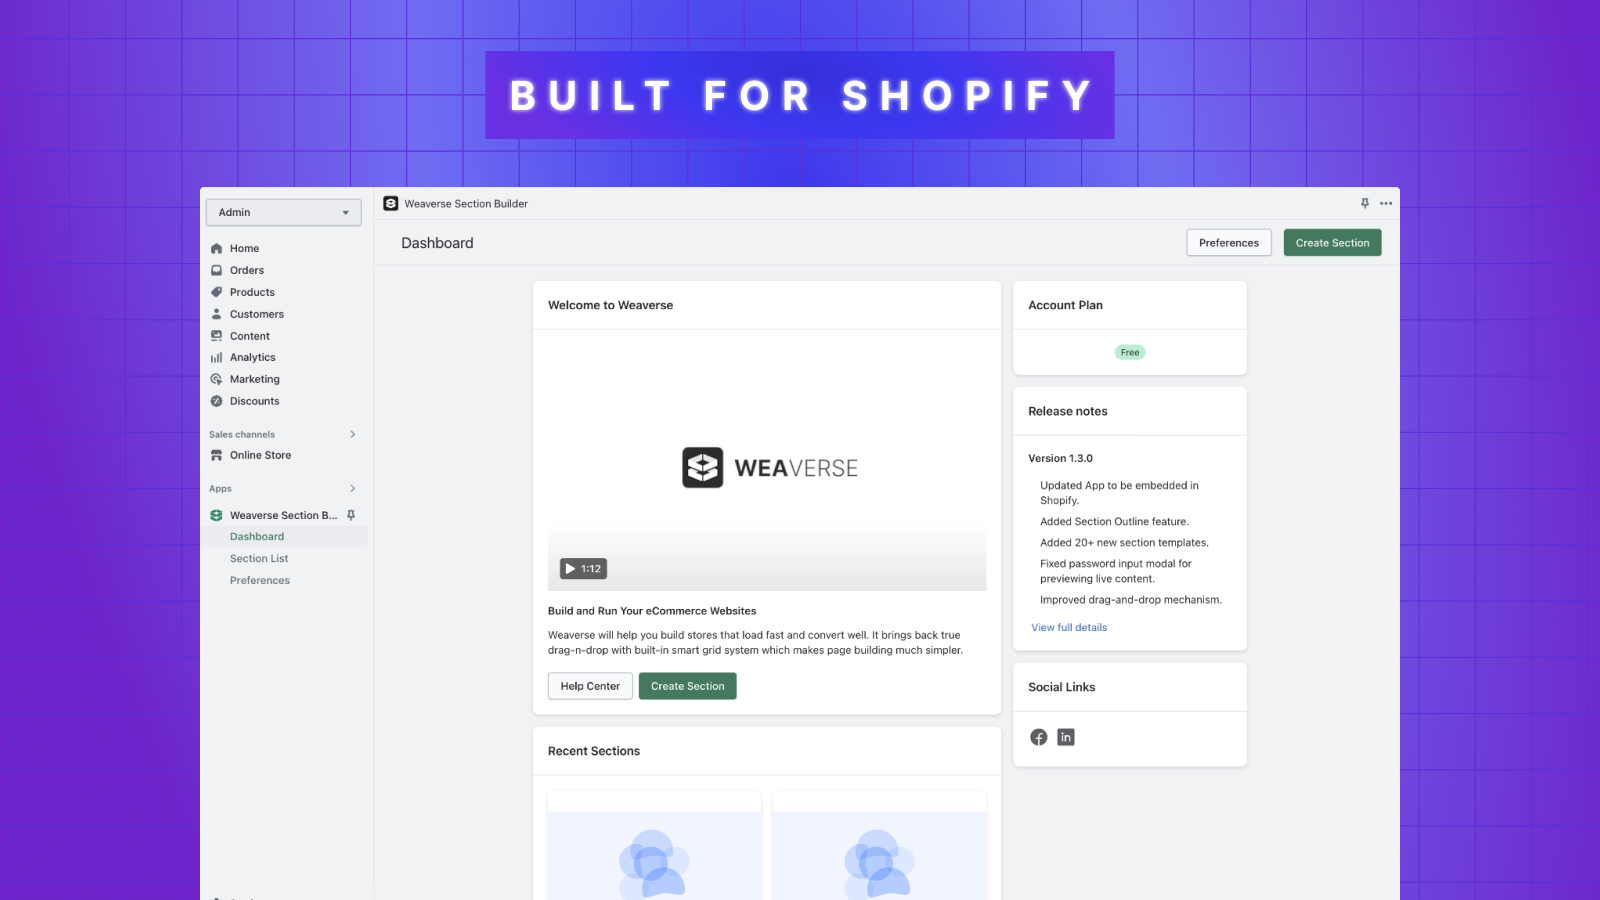 Built for Shopify